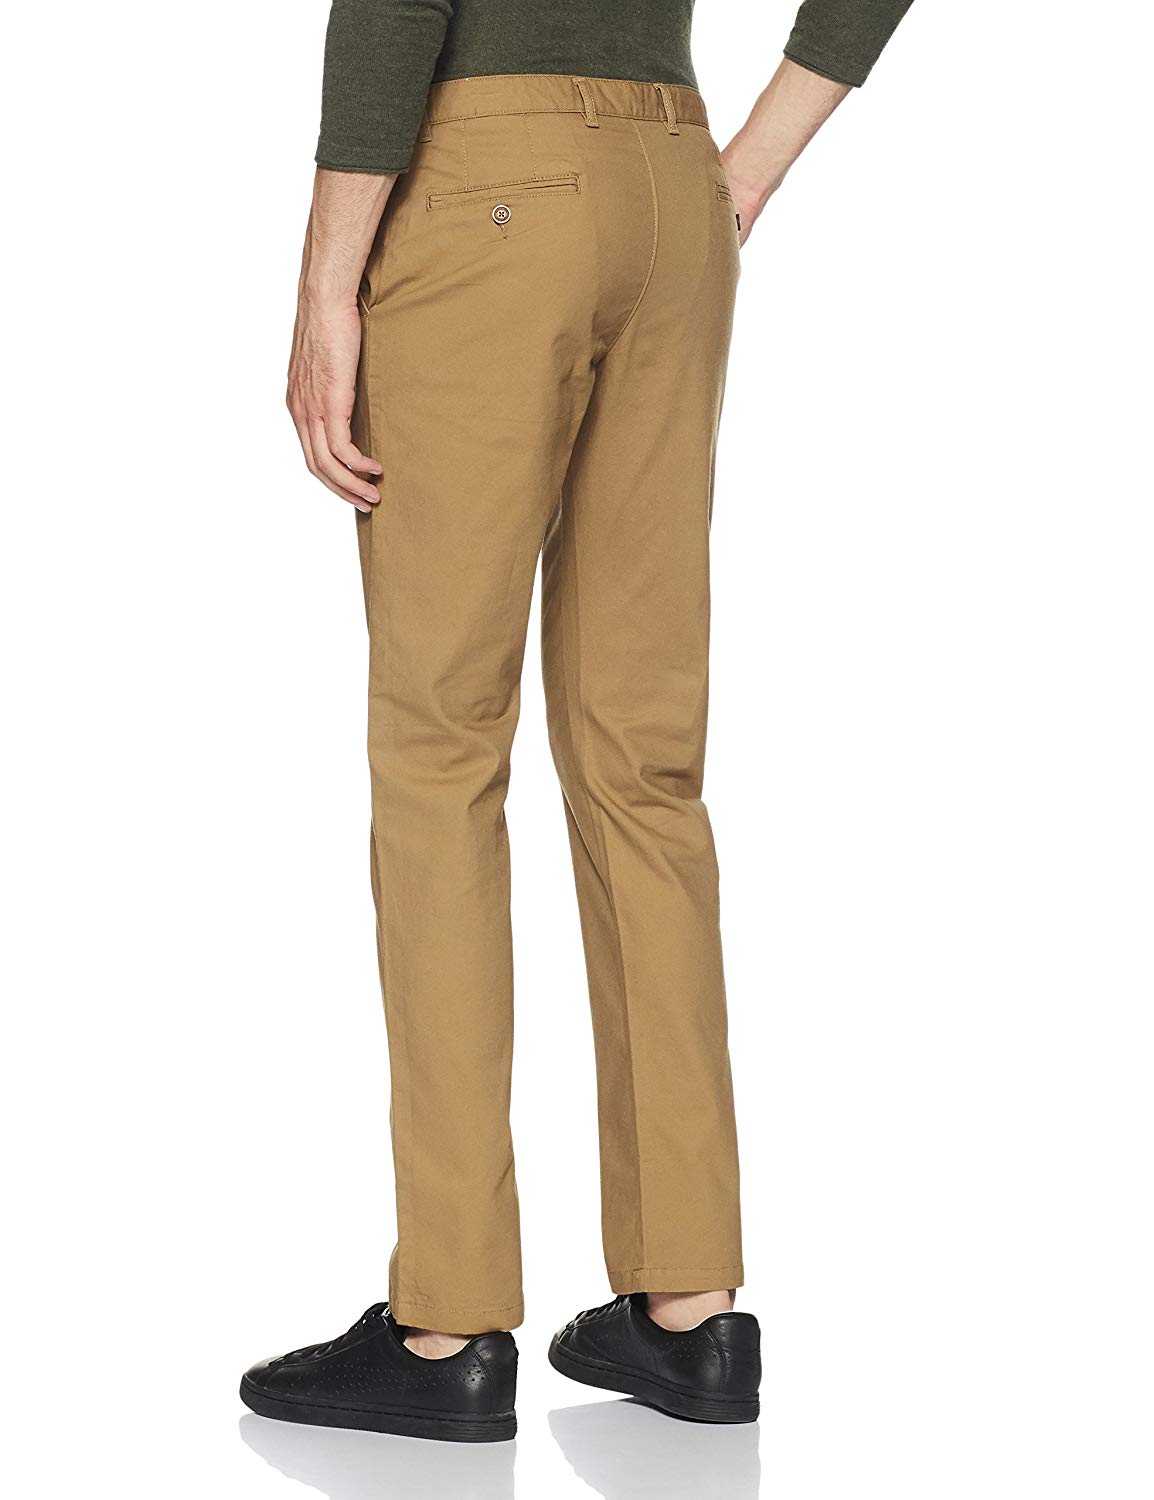 LivelyCart Pro 3 Demo : Levis Men Khaki 512 Tapered Fit Solid Chinos